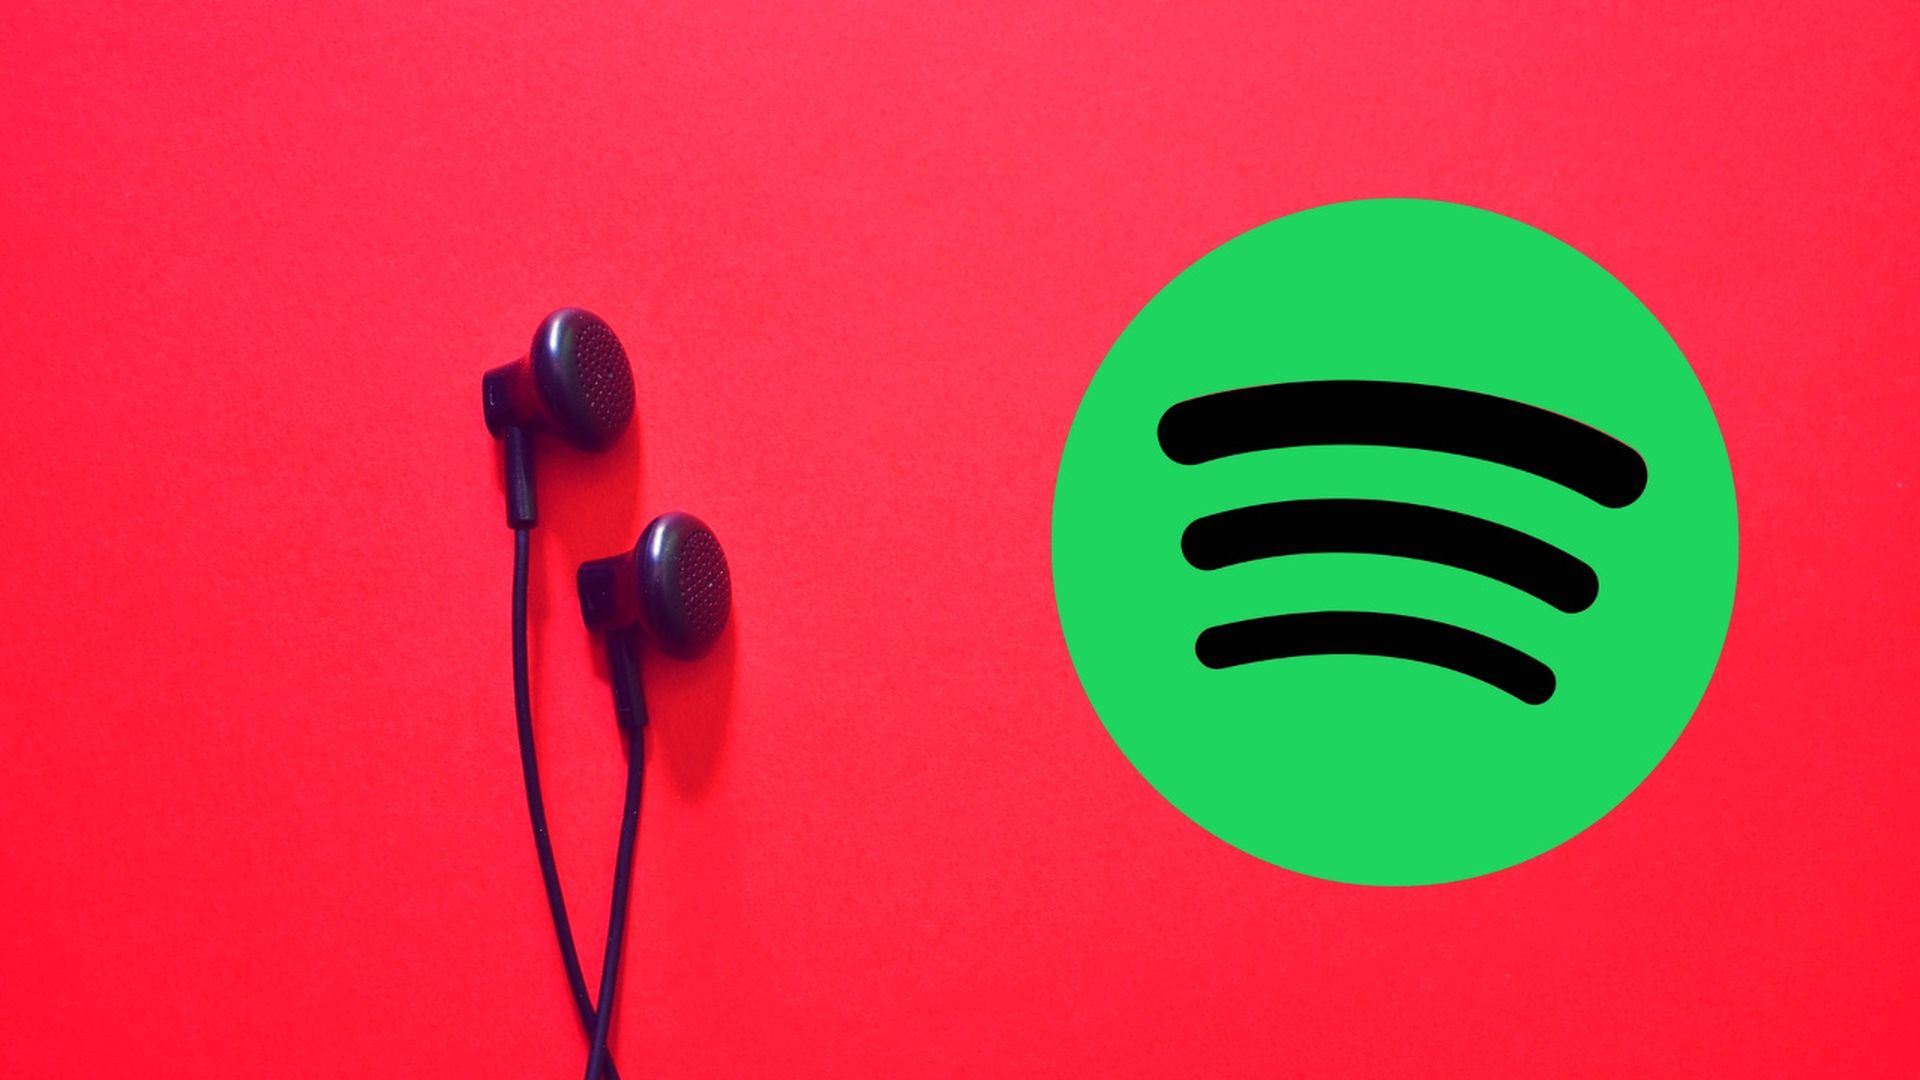 The popular music and podcast streaming service is offering a new deal, Spotify Premium three months free for new subscribers.